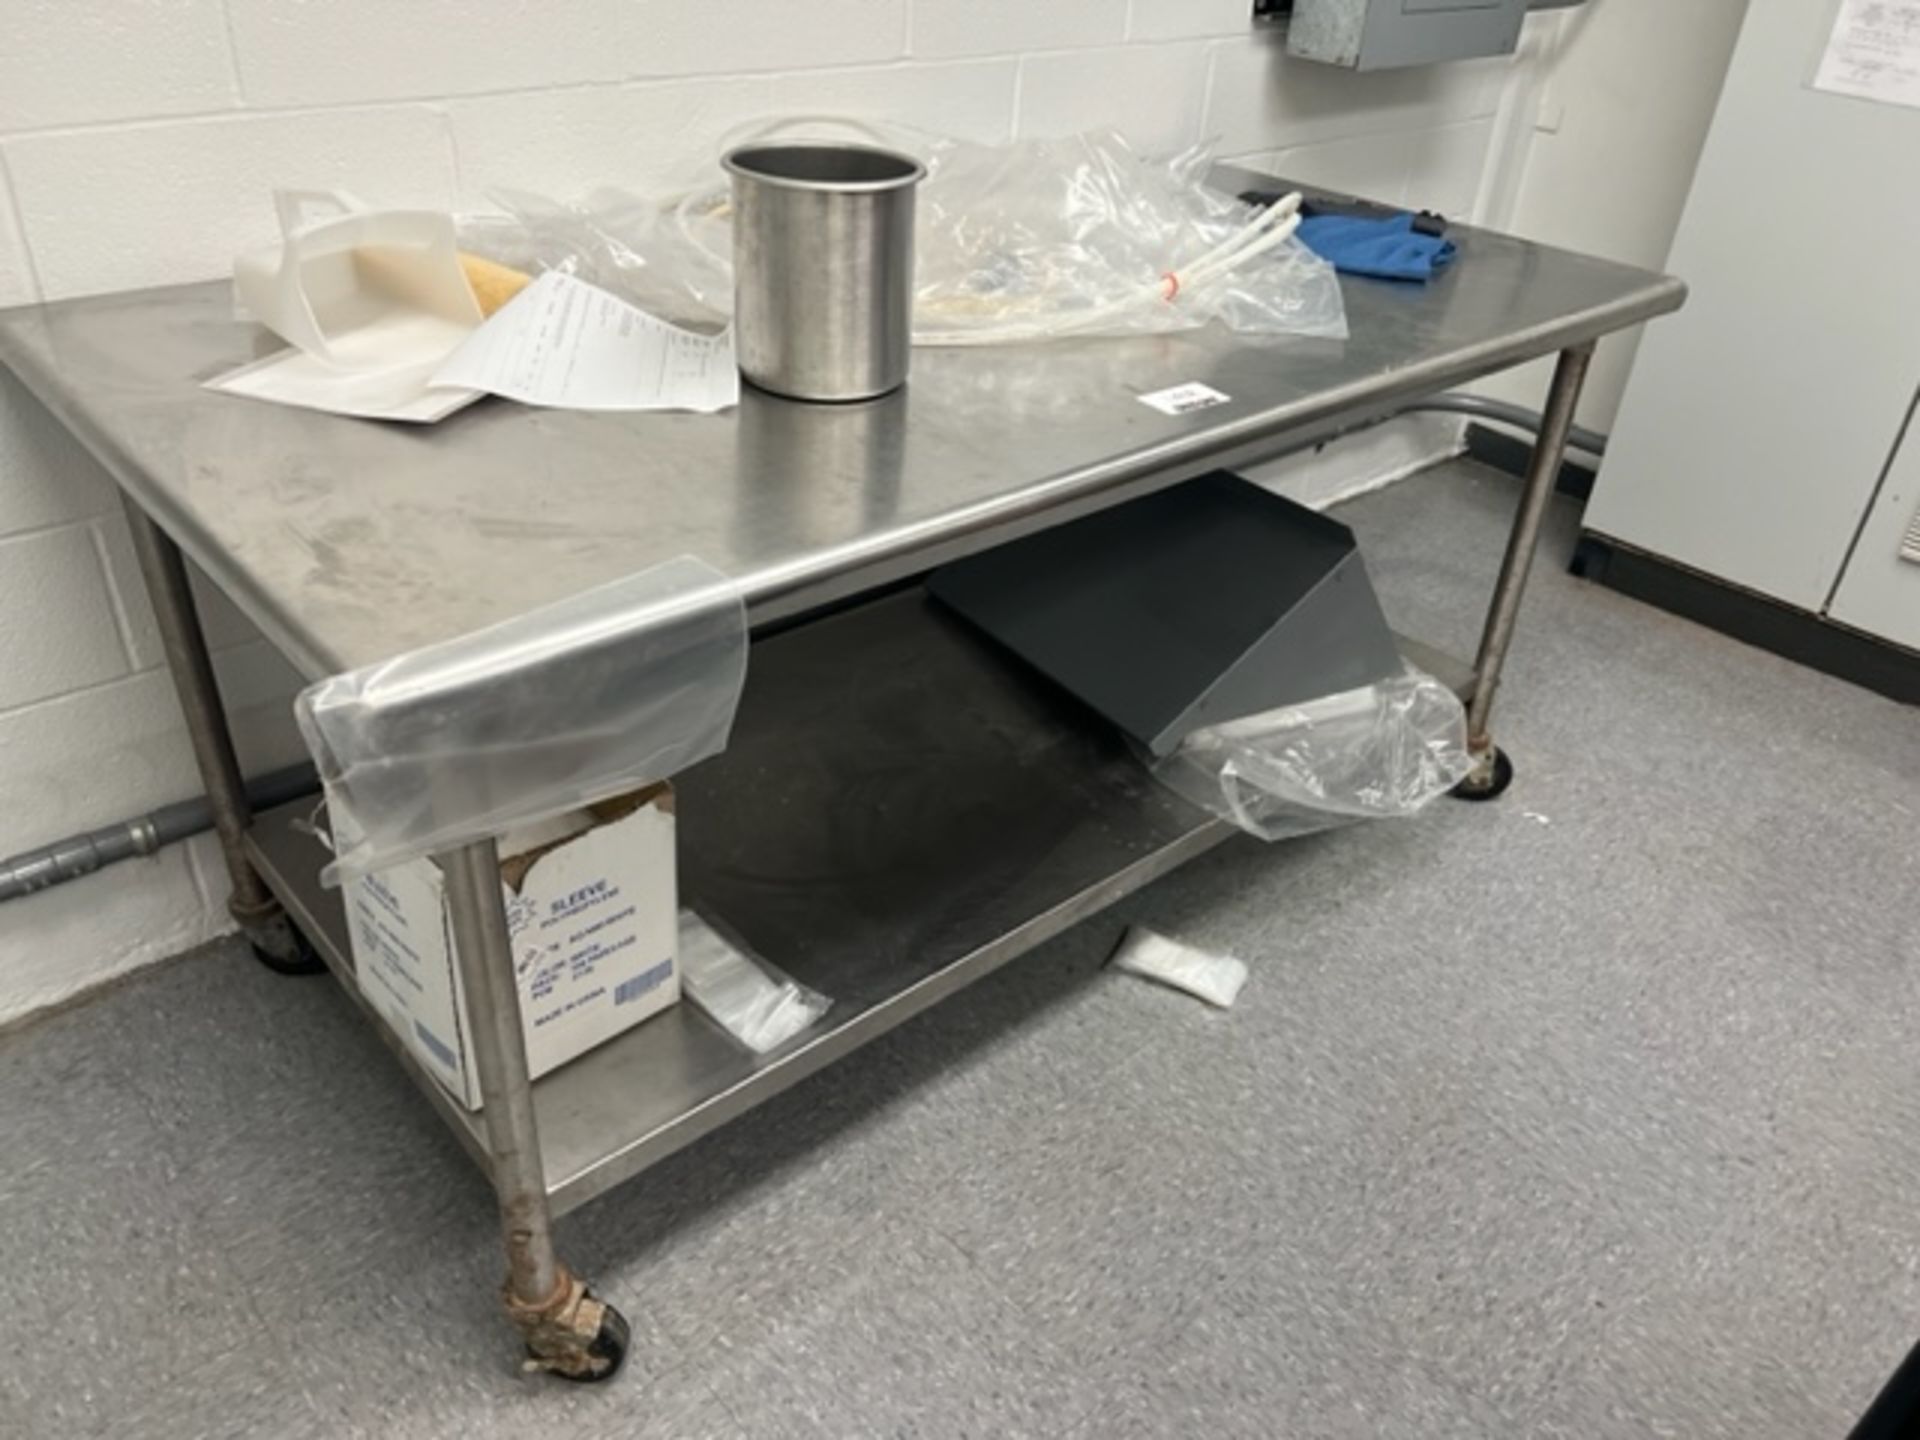 Asset 199 - 72" x 36" Stainless Steel table. $345.00 Rigged and packed on 48" x 40" pallet banded - Image 2 of 2